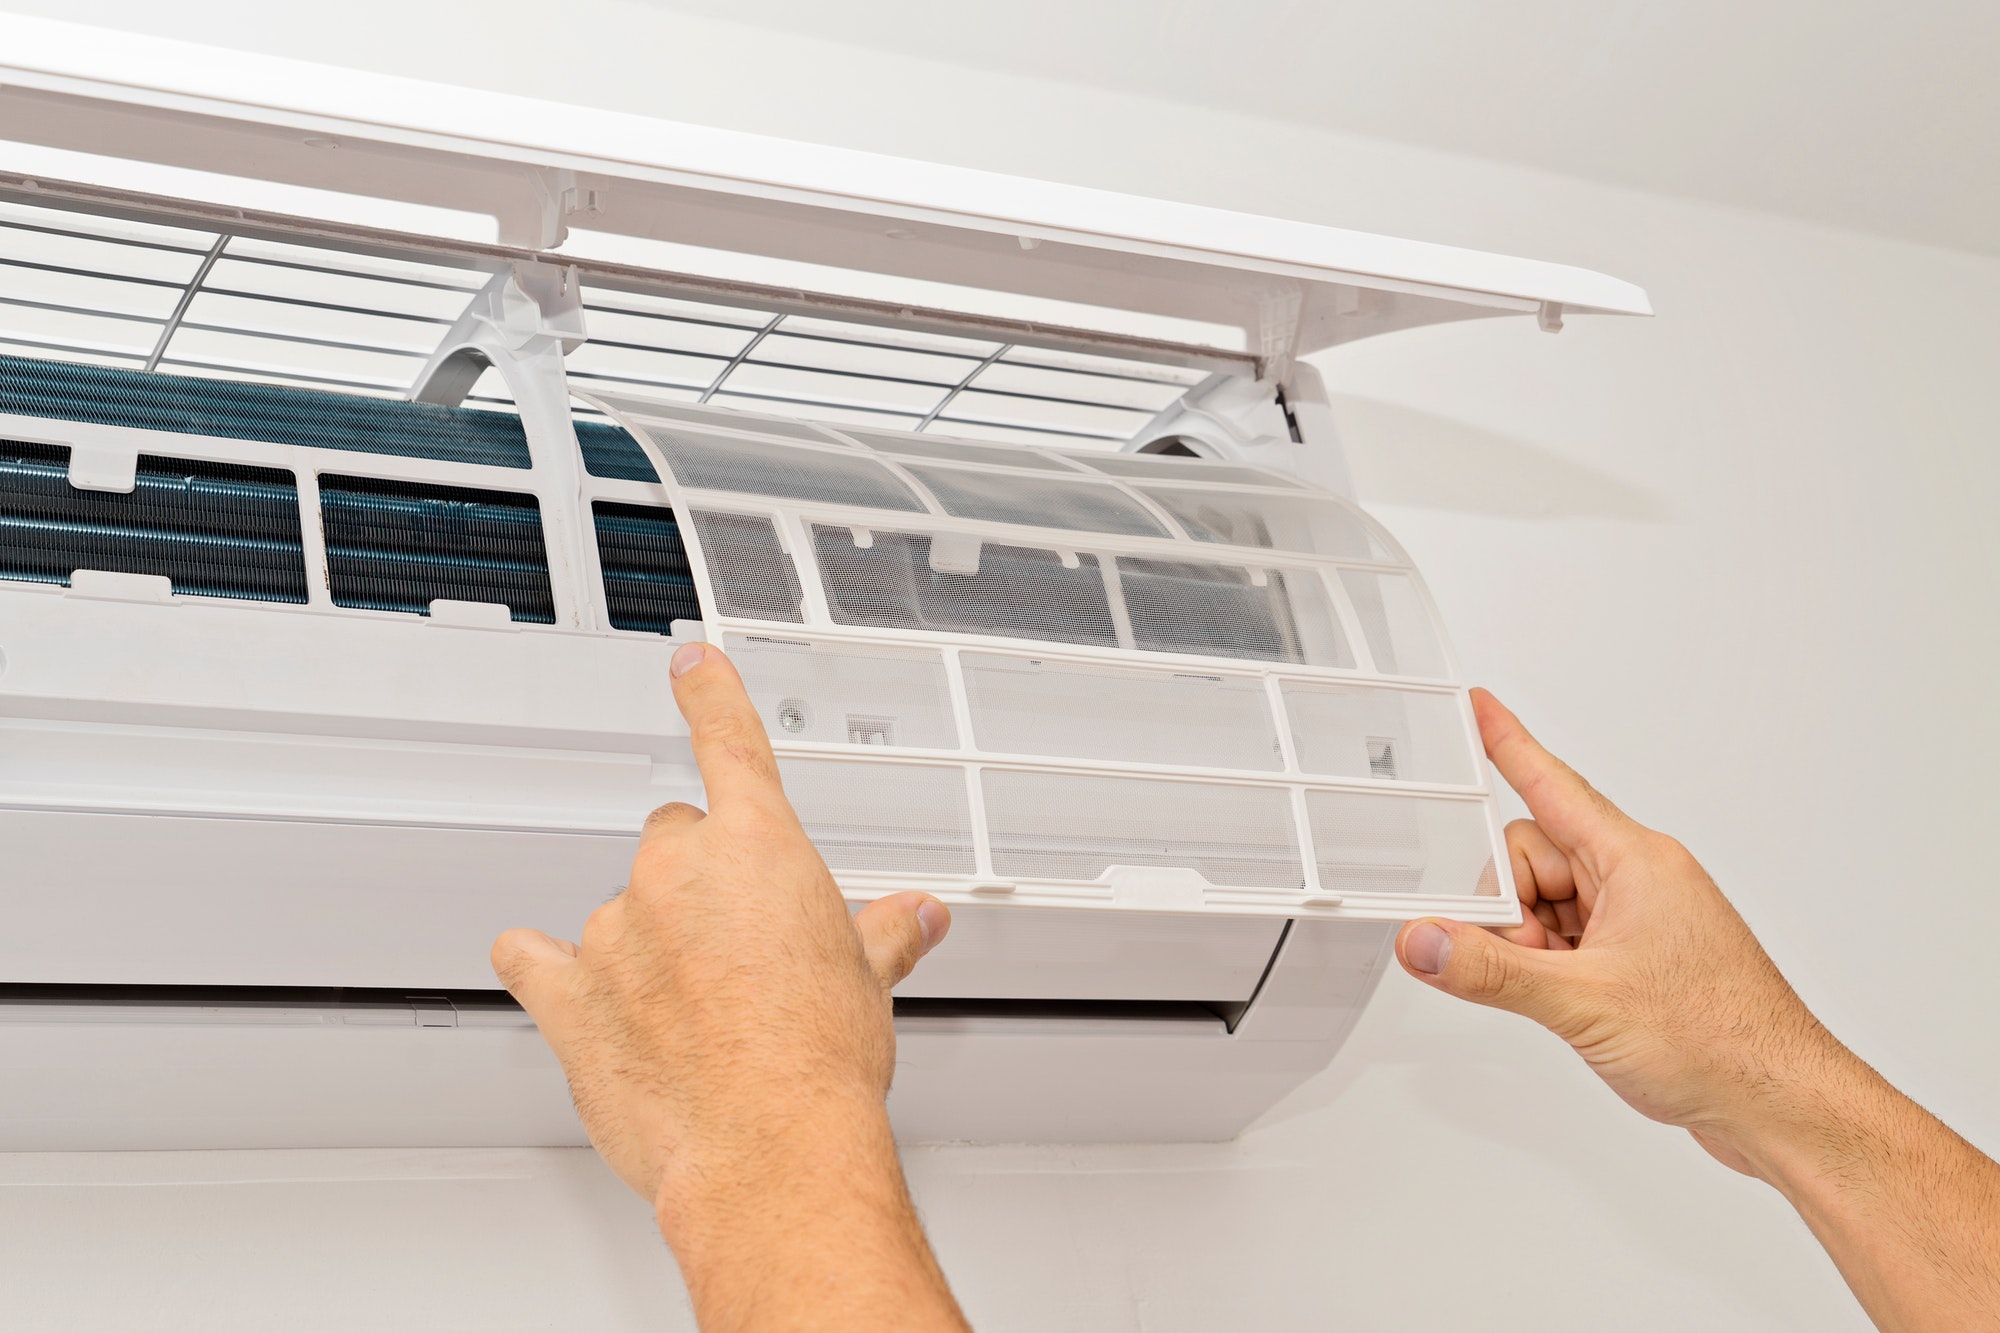 Changing the filter of the air conditioner